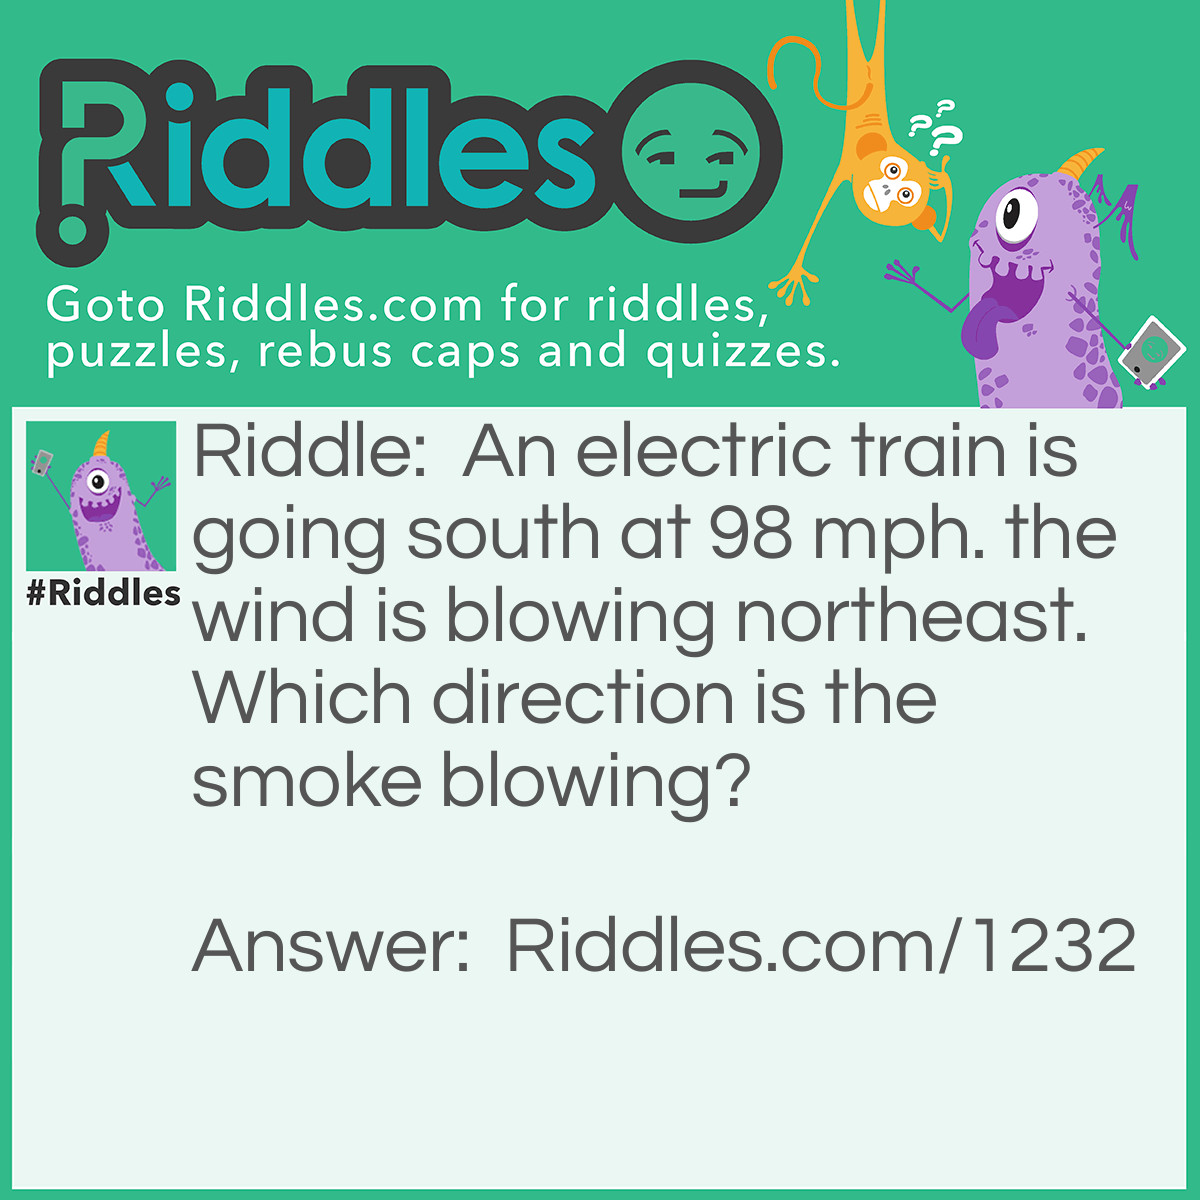 Riddle: An electric train is going south at 98 mph. The wind is blowing northeast. Which direction is the smoke blowing? Answer: There is no smoke. it's an electric train!